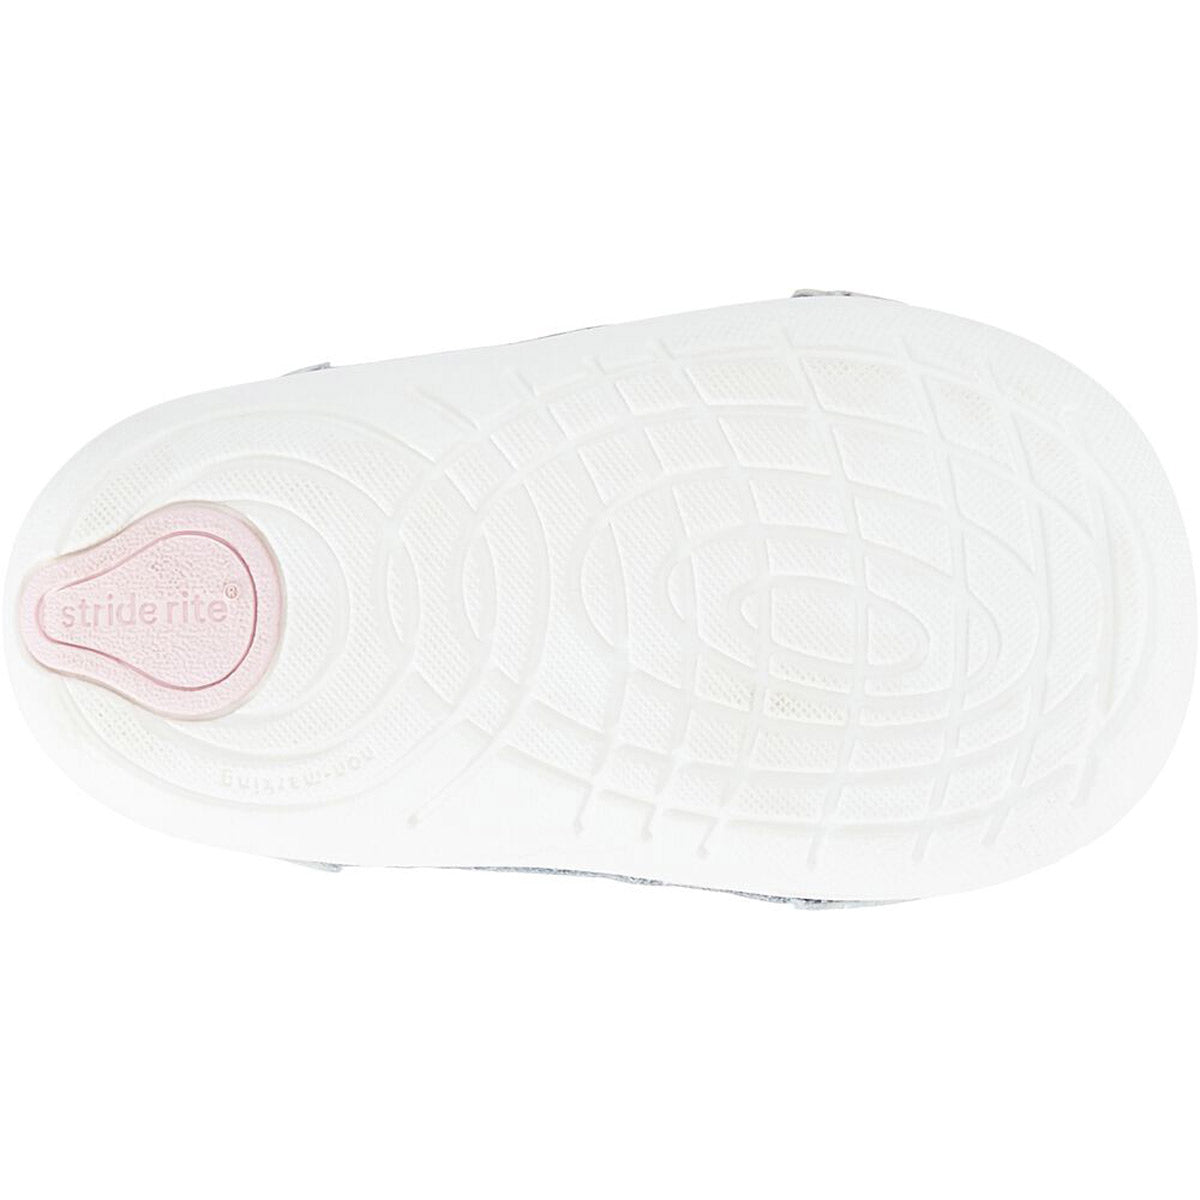 Sole of a Stride Rite shoe with a circular tread pattern, memory foam insoles, and a brand logo.